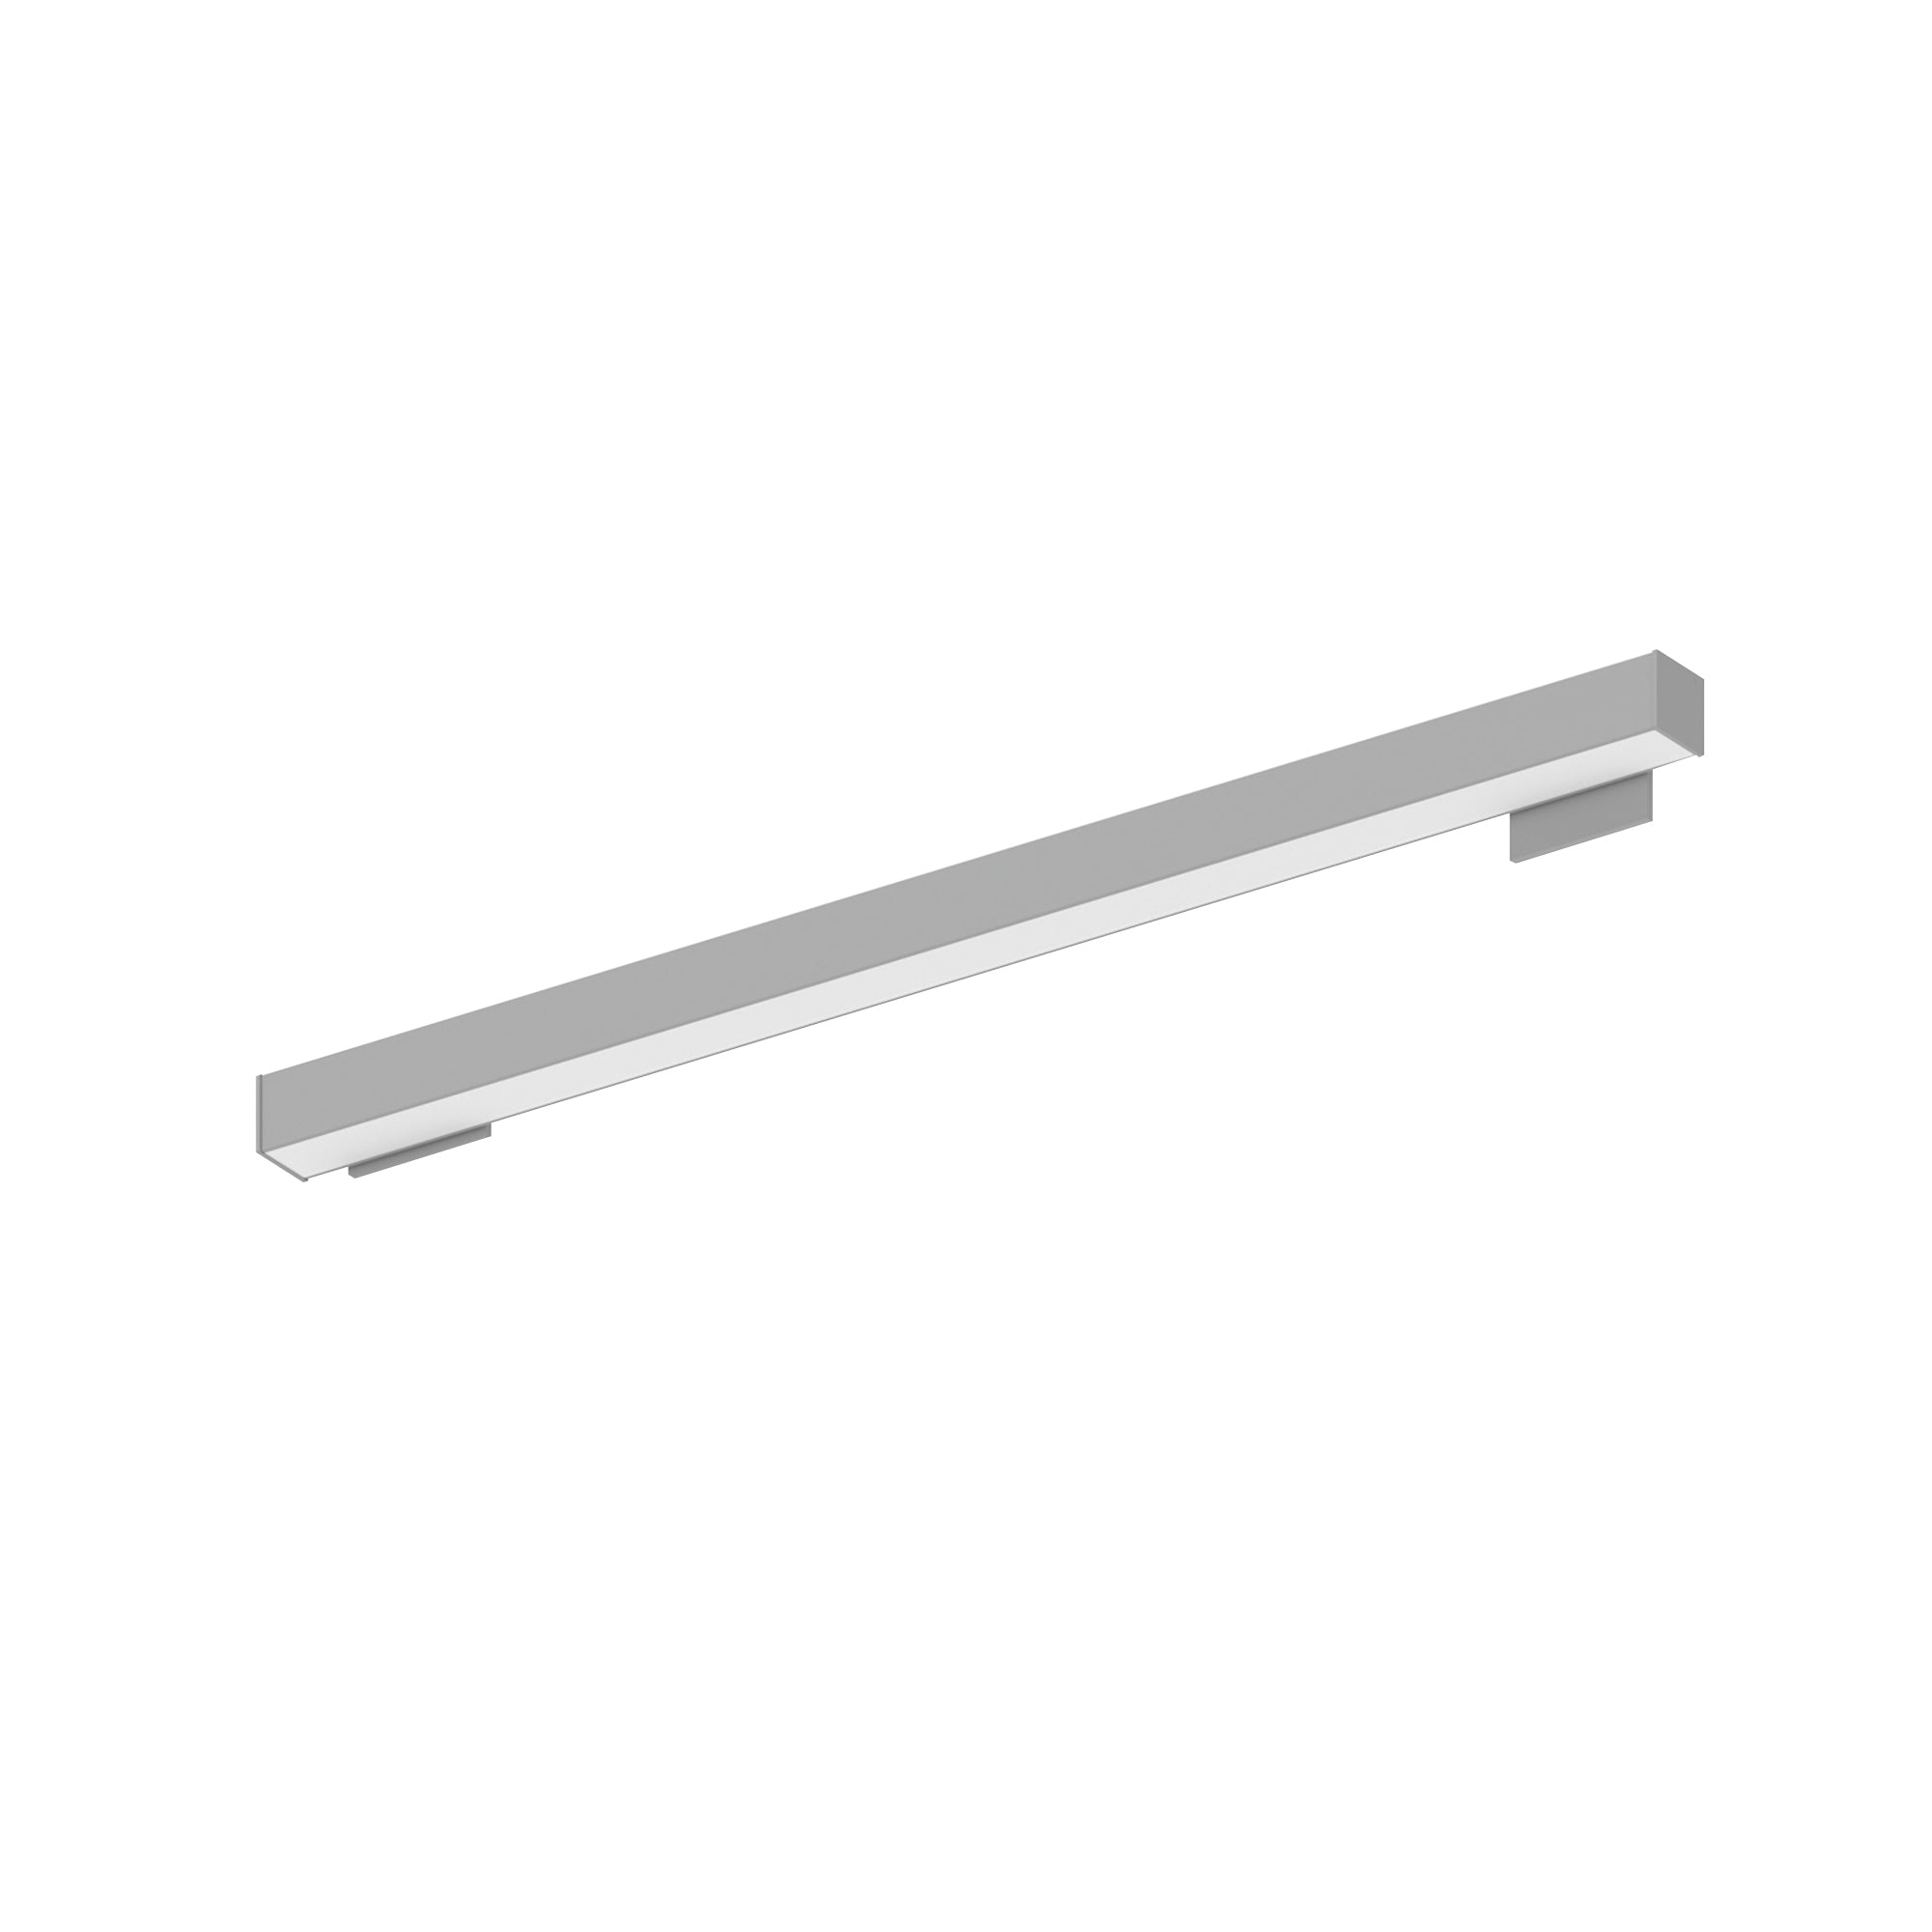 Nora Lighting NWLIN-41030A/L2-R4 - Linear - 4' L-Line LED Wall Mount Linear, 4200lm / 3000K, 2 Inchx4 Inch Left Plate & 4 Inchx4 Inch Right Plate, Aluminum Finish